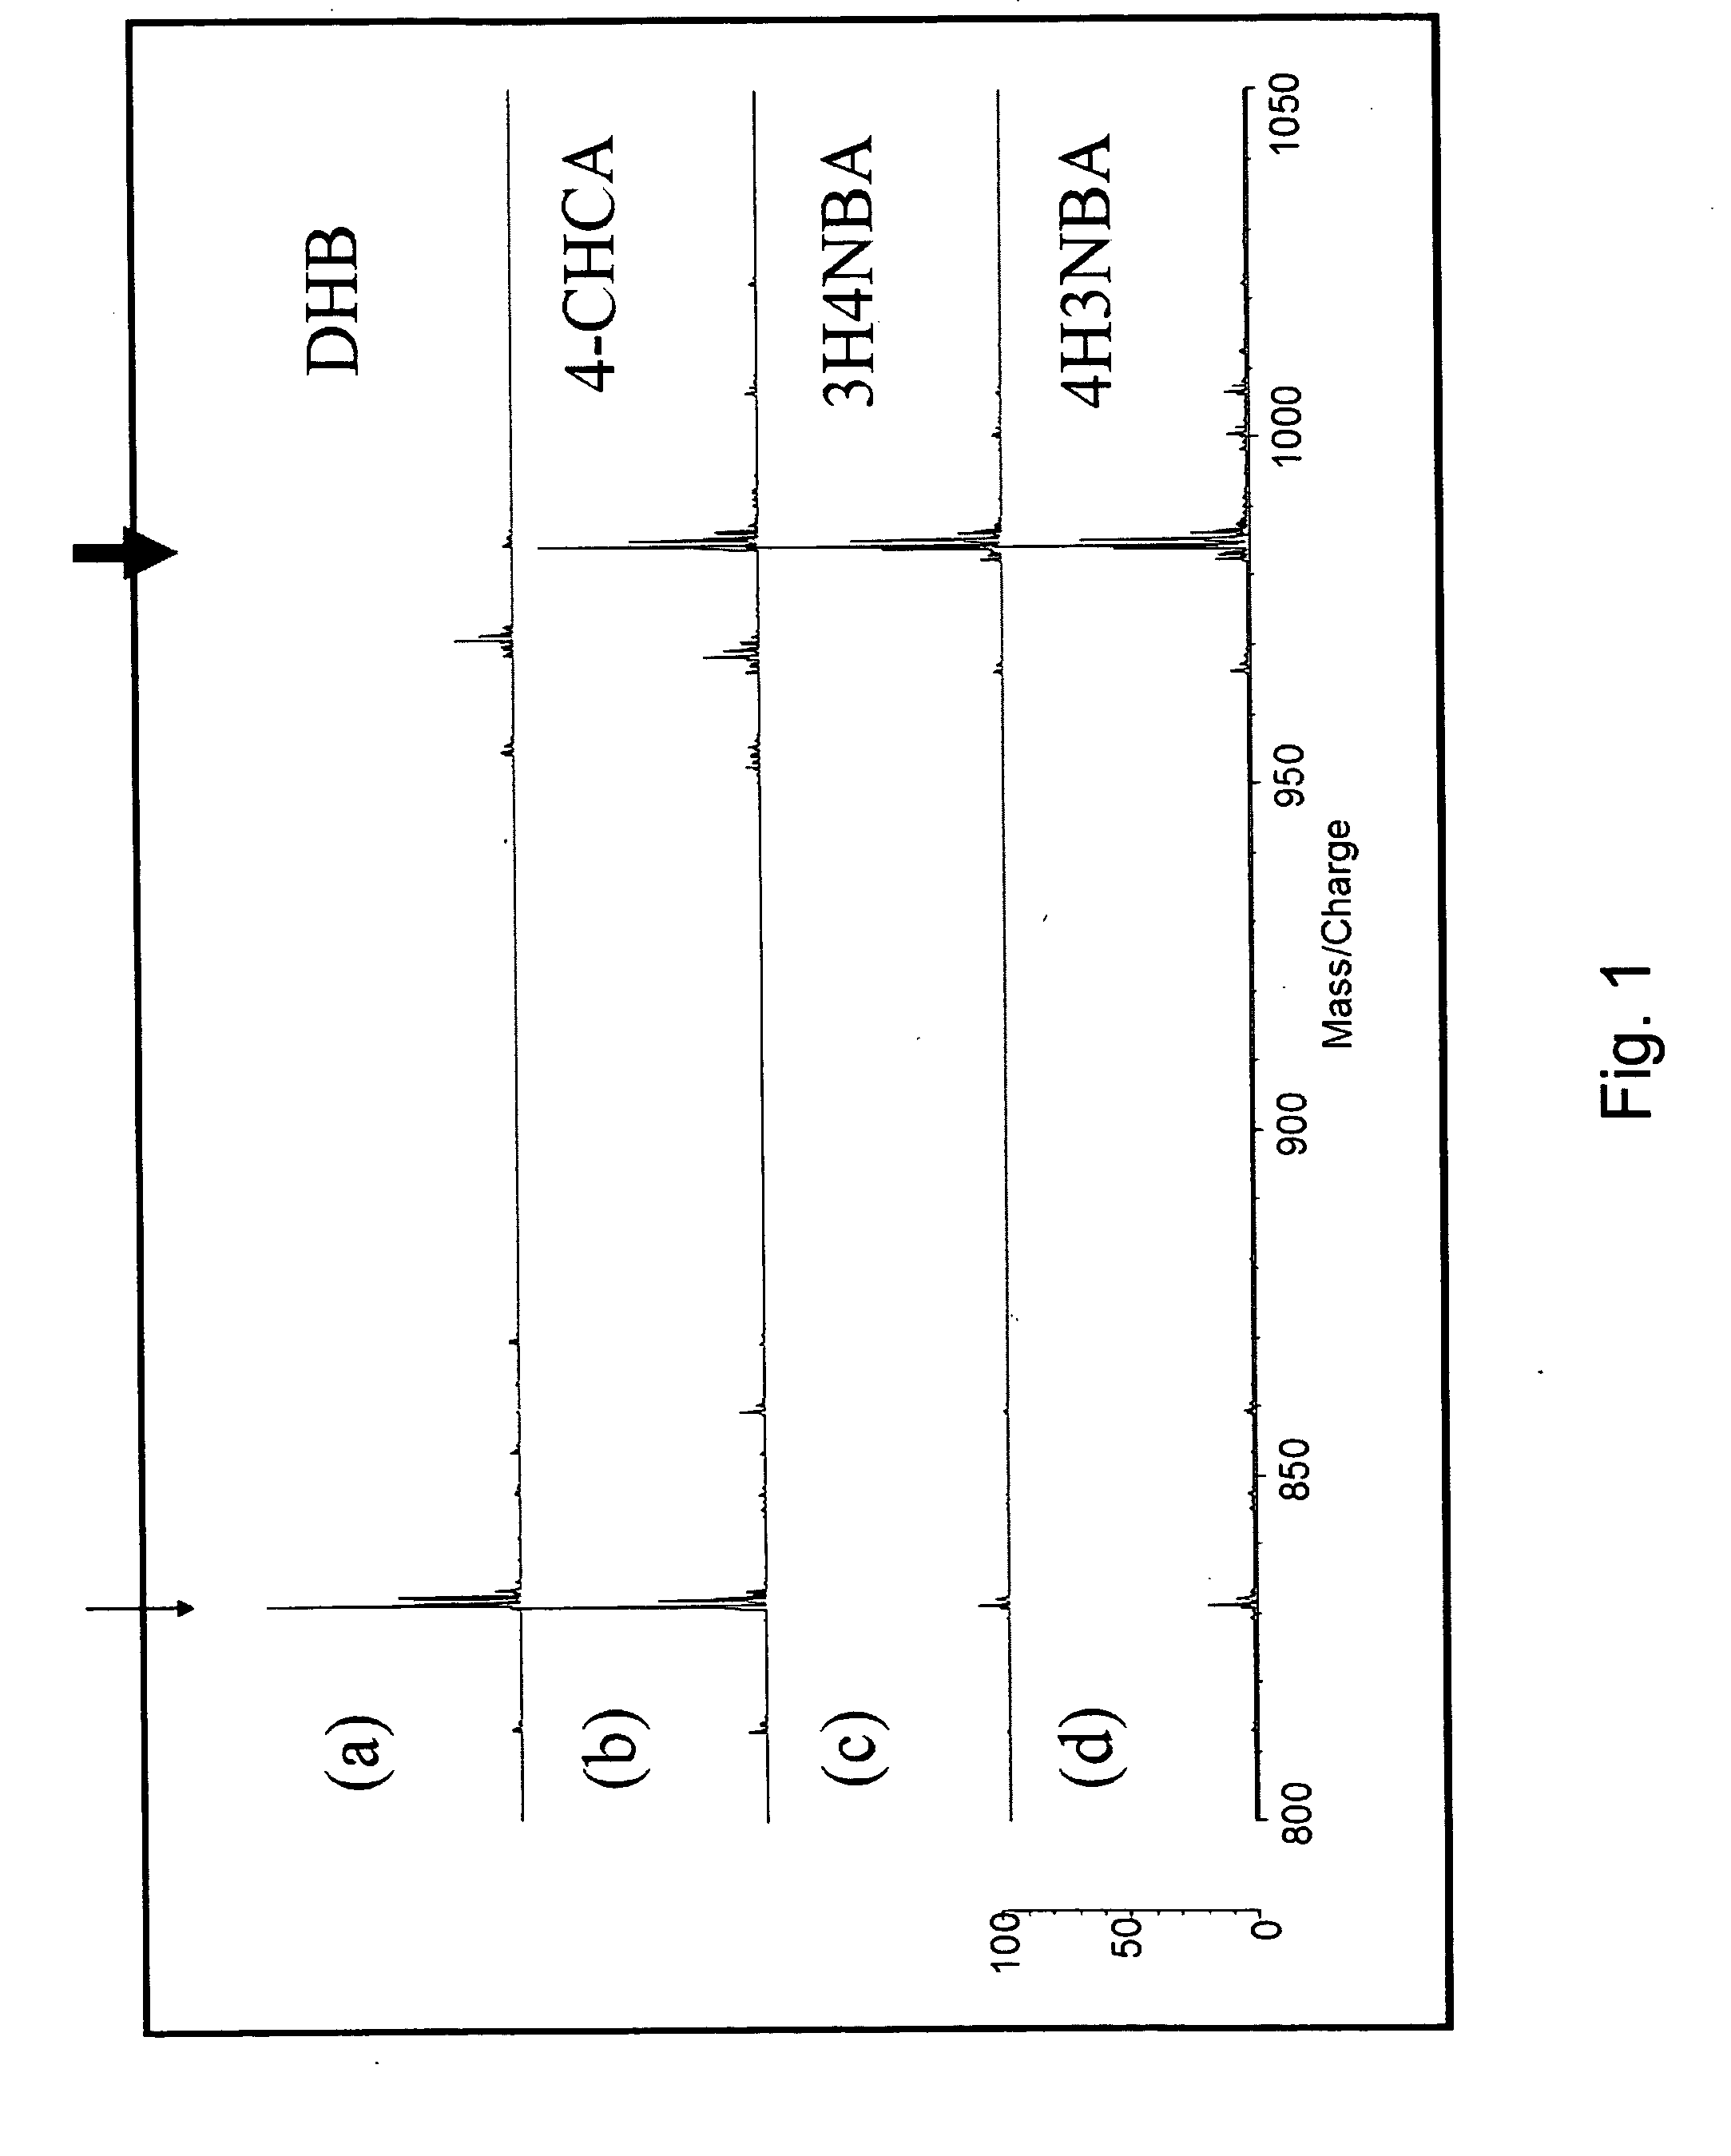 Method for selective measurement of specific substances from a mixture by maldi mass spectrometry